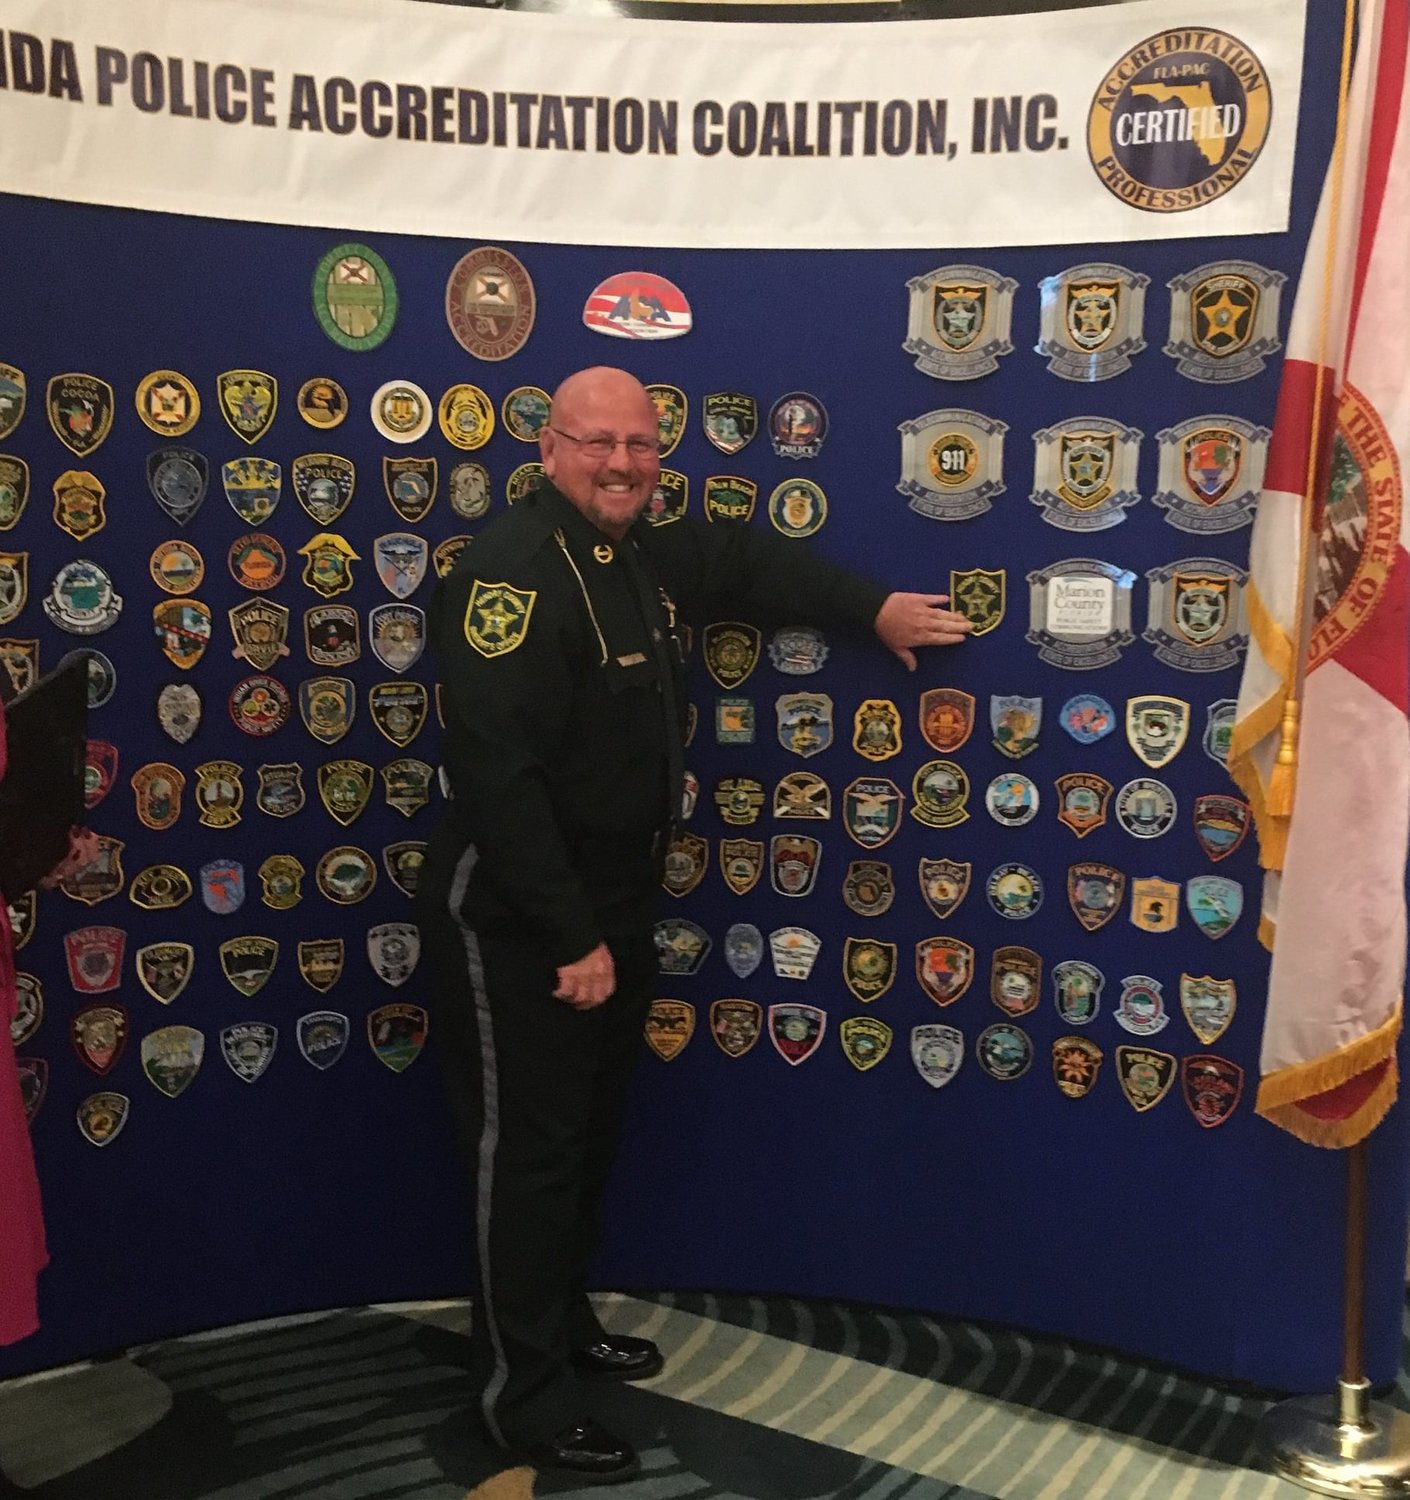 Hendry County Sheriff Steve Whidden announced that on Oct. 7, 2021, the Hendry County Sheriff’s Office received its third Certificate of Re-Accreditation from the Commission for Florida Law Enforcement Accreditation (CFA).